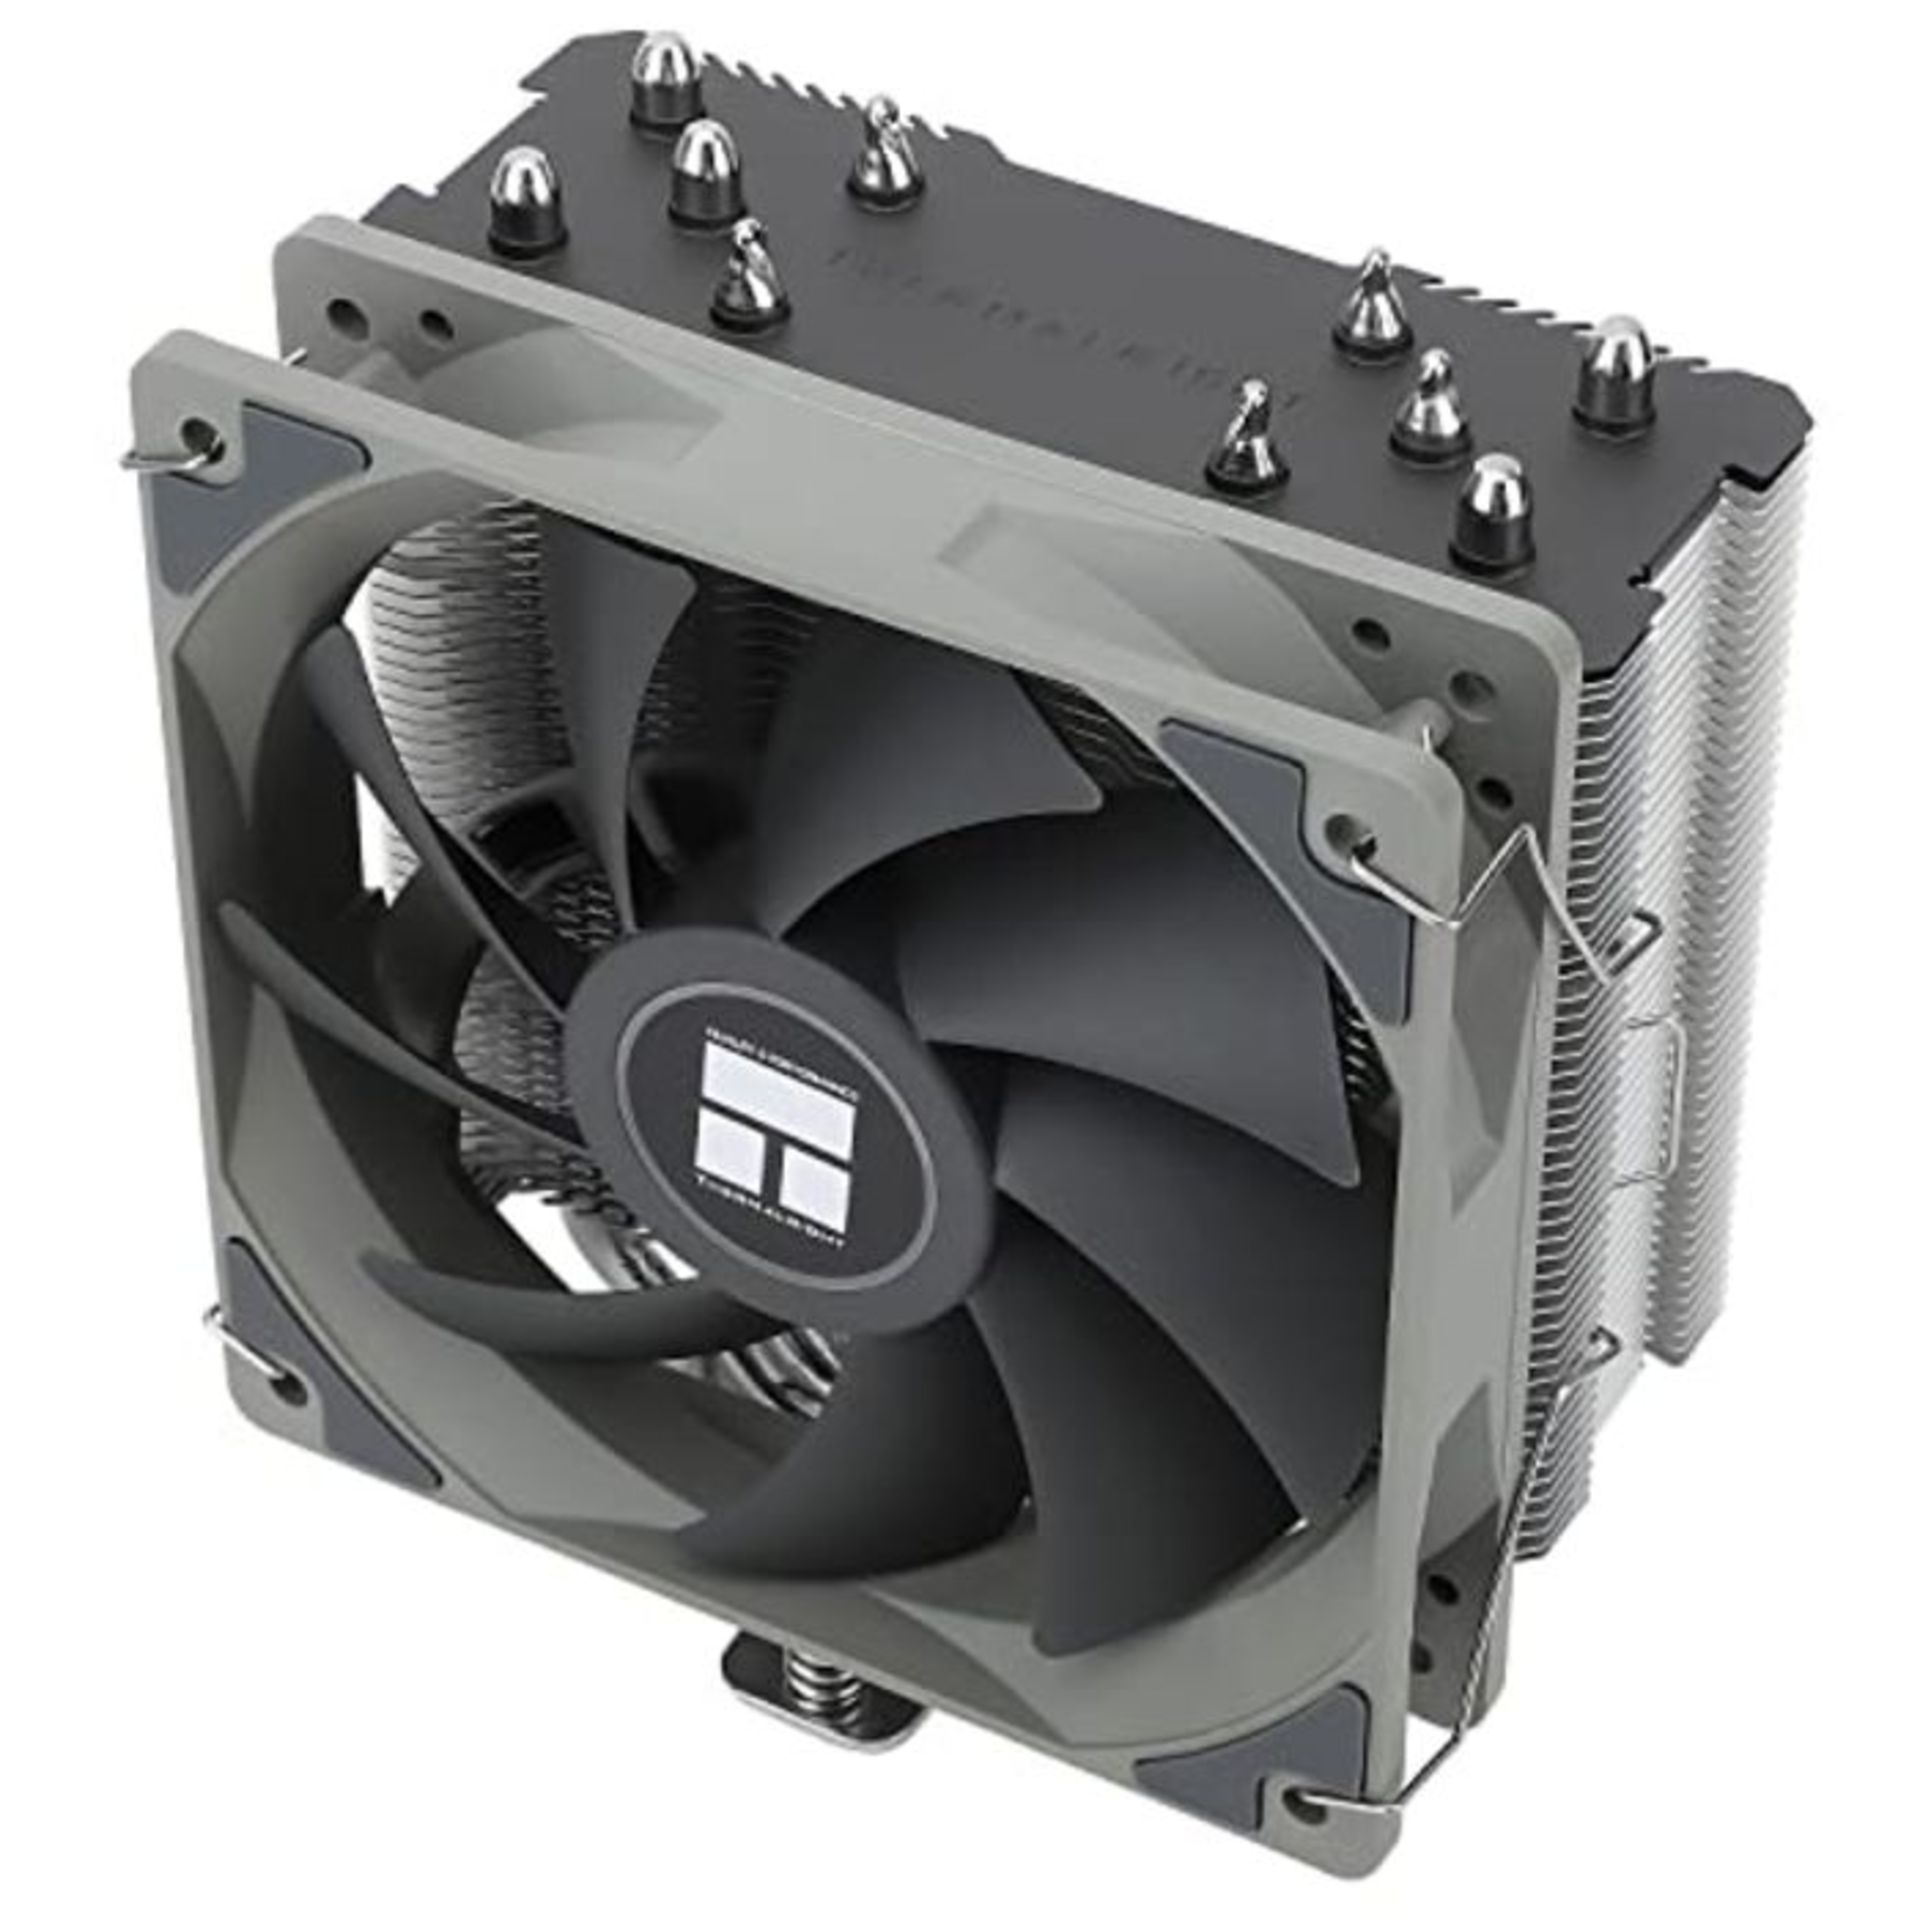 Thermalright Assassin King 120 SE CPU Air Cooler, AK120 SE, 5 Heatpipes, AGHP technolo